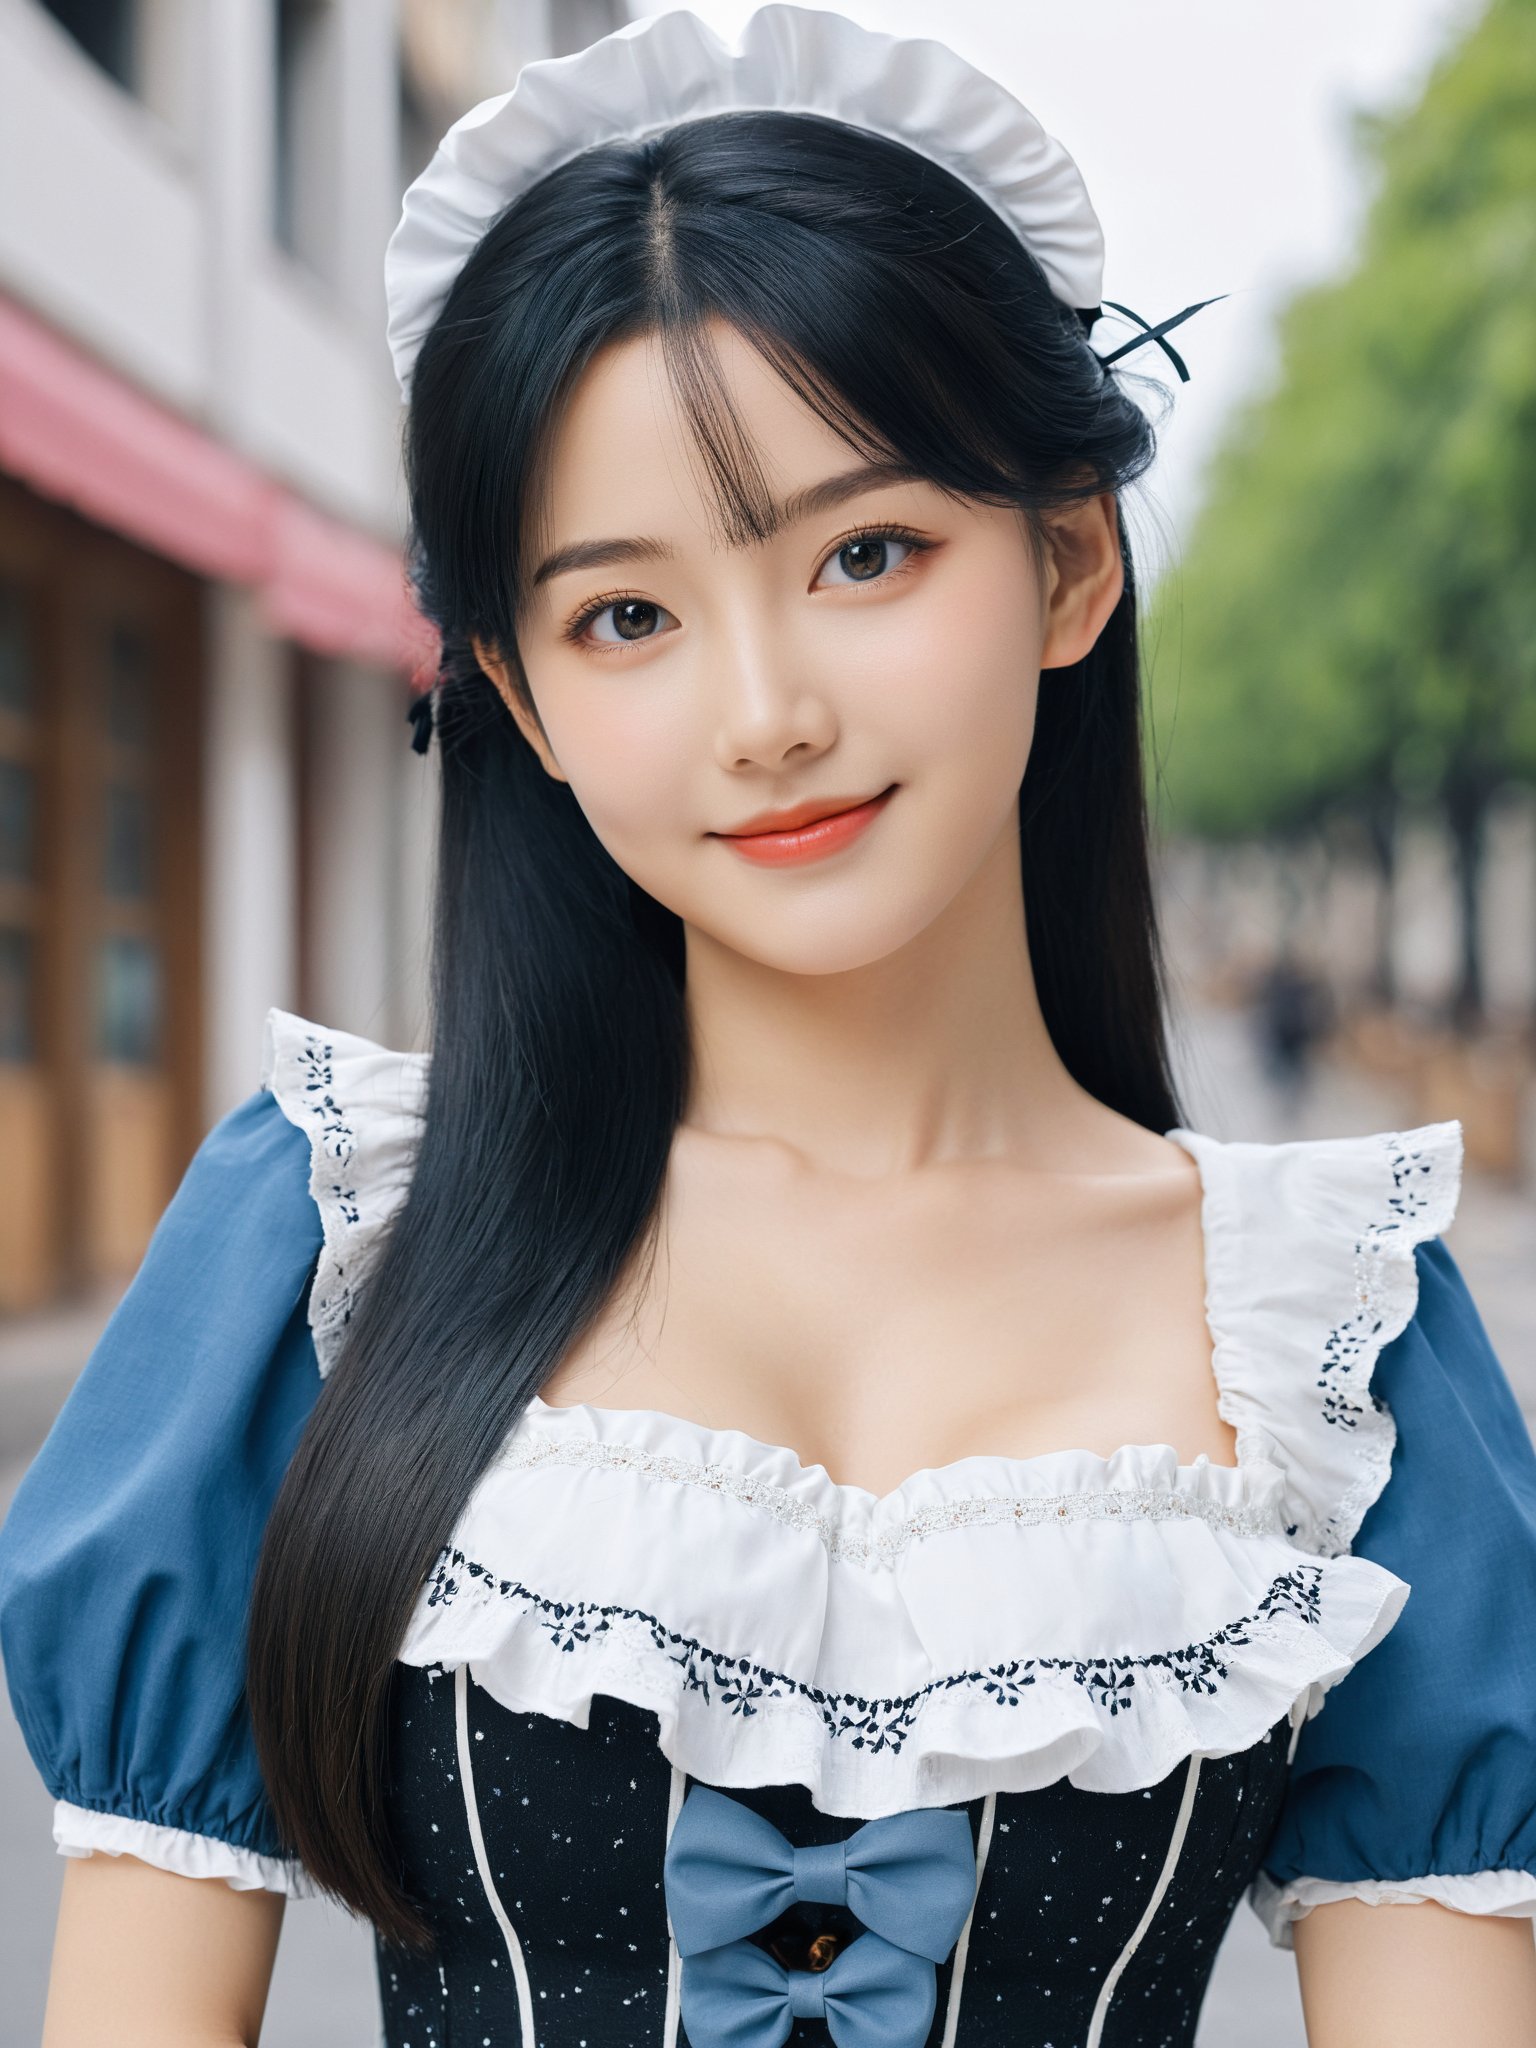 masterpiece, best quality, realistic, photo, real, incredibly_absurdres, Ultra HD,Affectionately looking at you,8K,UHD,in the city street,simple background, upper body, arms behind head,arms behind back , bust photo,The 18-year-old Chinese girl Wearing a lolita_fashion, ,She has black hair. The lines of her face are soft and smooth. Her skin is as fair as snow, soft and delicate, and her eyes are bright and bright, deep and mysterious, making people feel endless charm and appeal. The eyebrows are slender and graceful, the nose is straight and noble, the lips are rosy and seductive, and the slightly raised angle reveals confidence and elegance. Her facial features are delicate and three-dimensional, with well-defined contours, like a fine painting or a finely carved work of art. The overall feeling is gentle, elegant, noble and full of charm.masterpiece, best quality, realistic, photo, real, absurdres, incredibly_absurdres, huge_filesize, bust, girl, kawaii, adorable girl, bishoujo, ojousama, idol, student, long hair, black hair, beautiful detailed eyes, looking at viewer, seductive smile, black eyes, large breasts, arms behind back ,